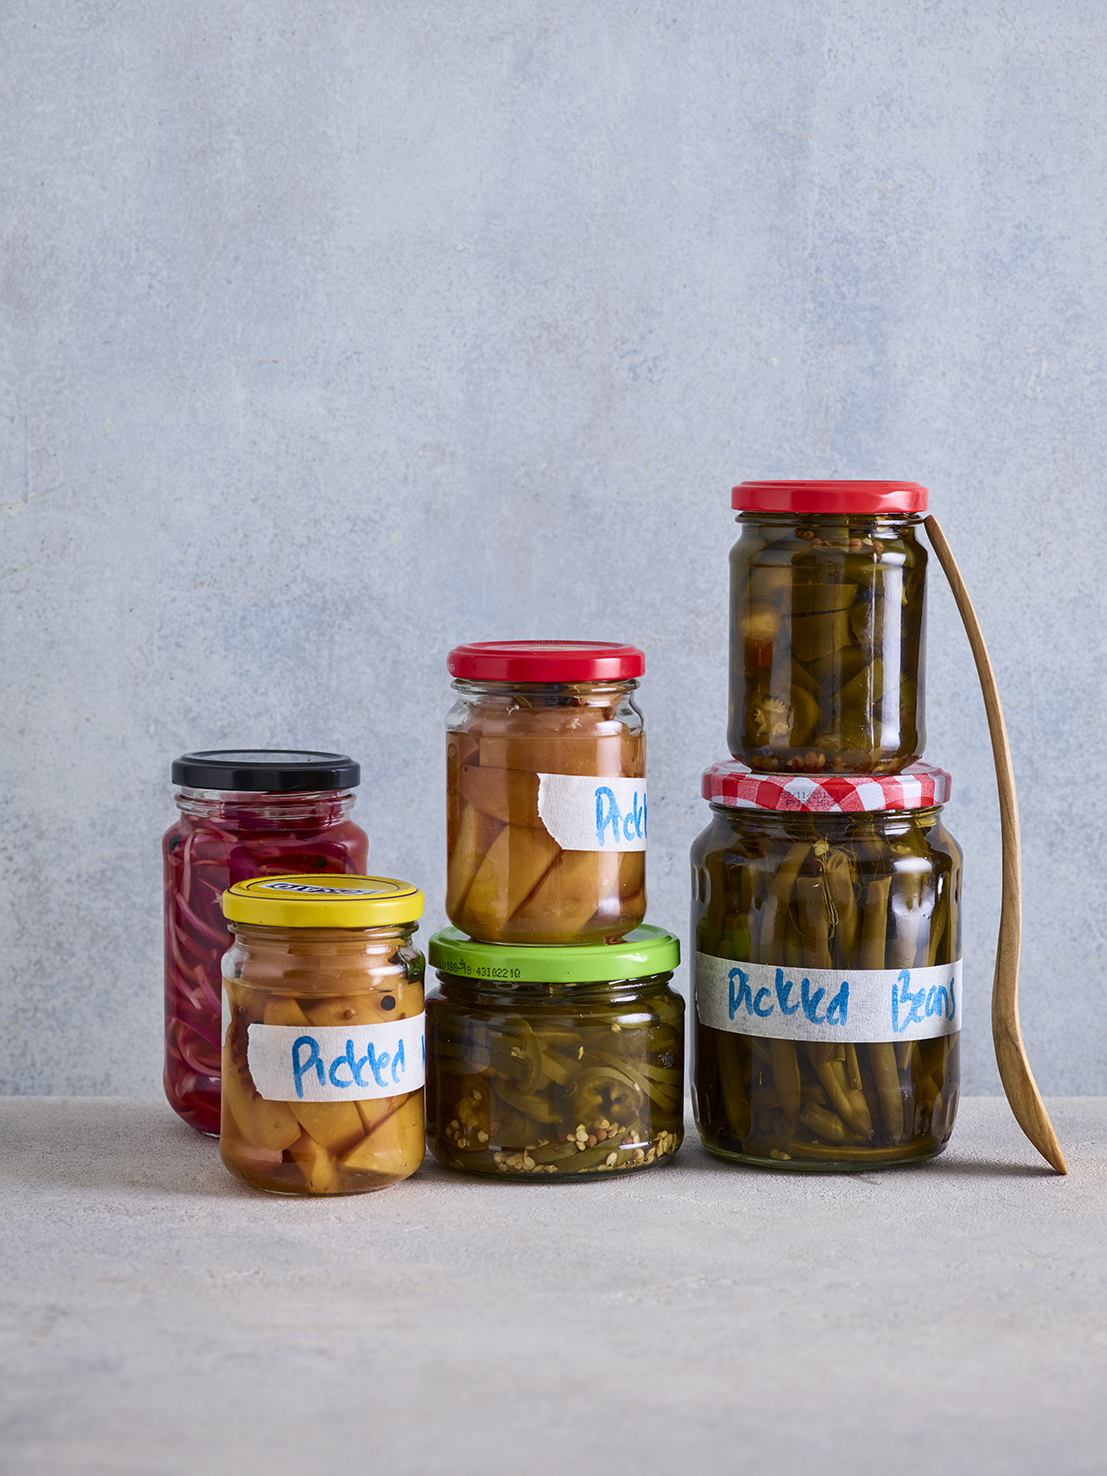 Pickling and preserving